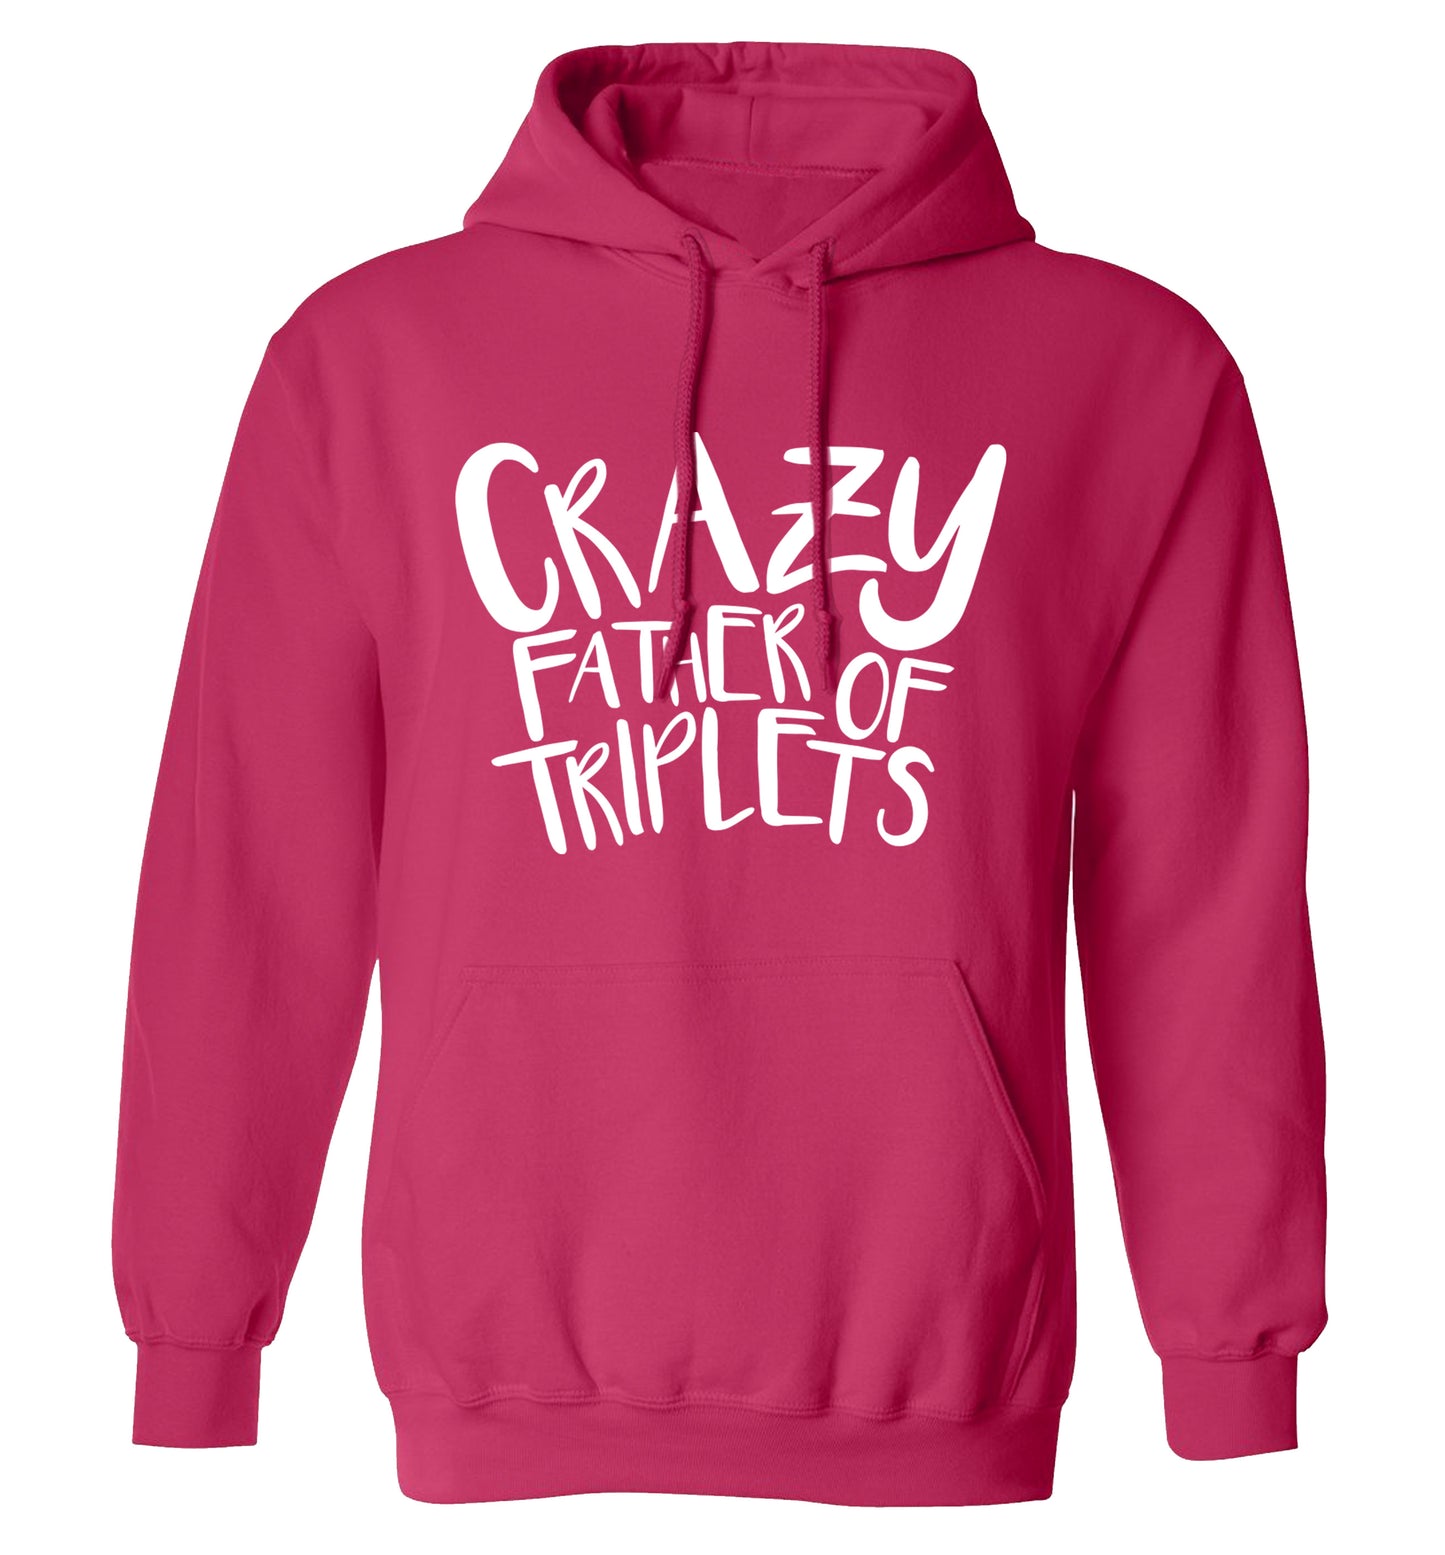 Crazy father of triplets adults unisex pink hoodie 2XL